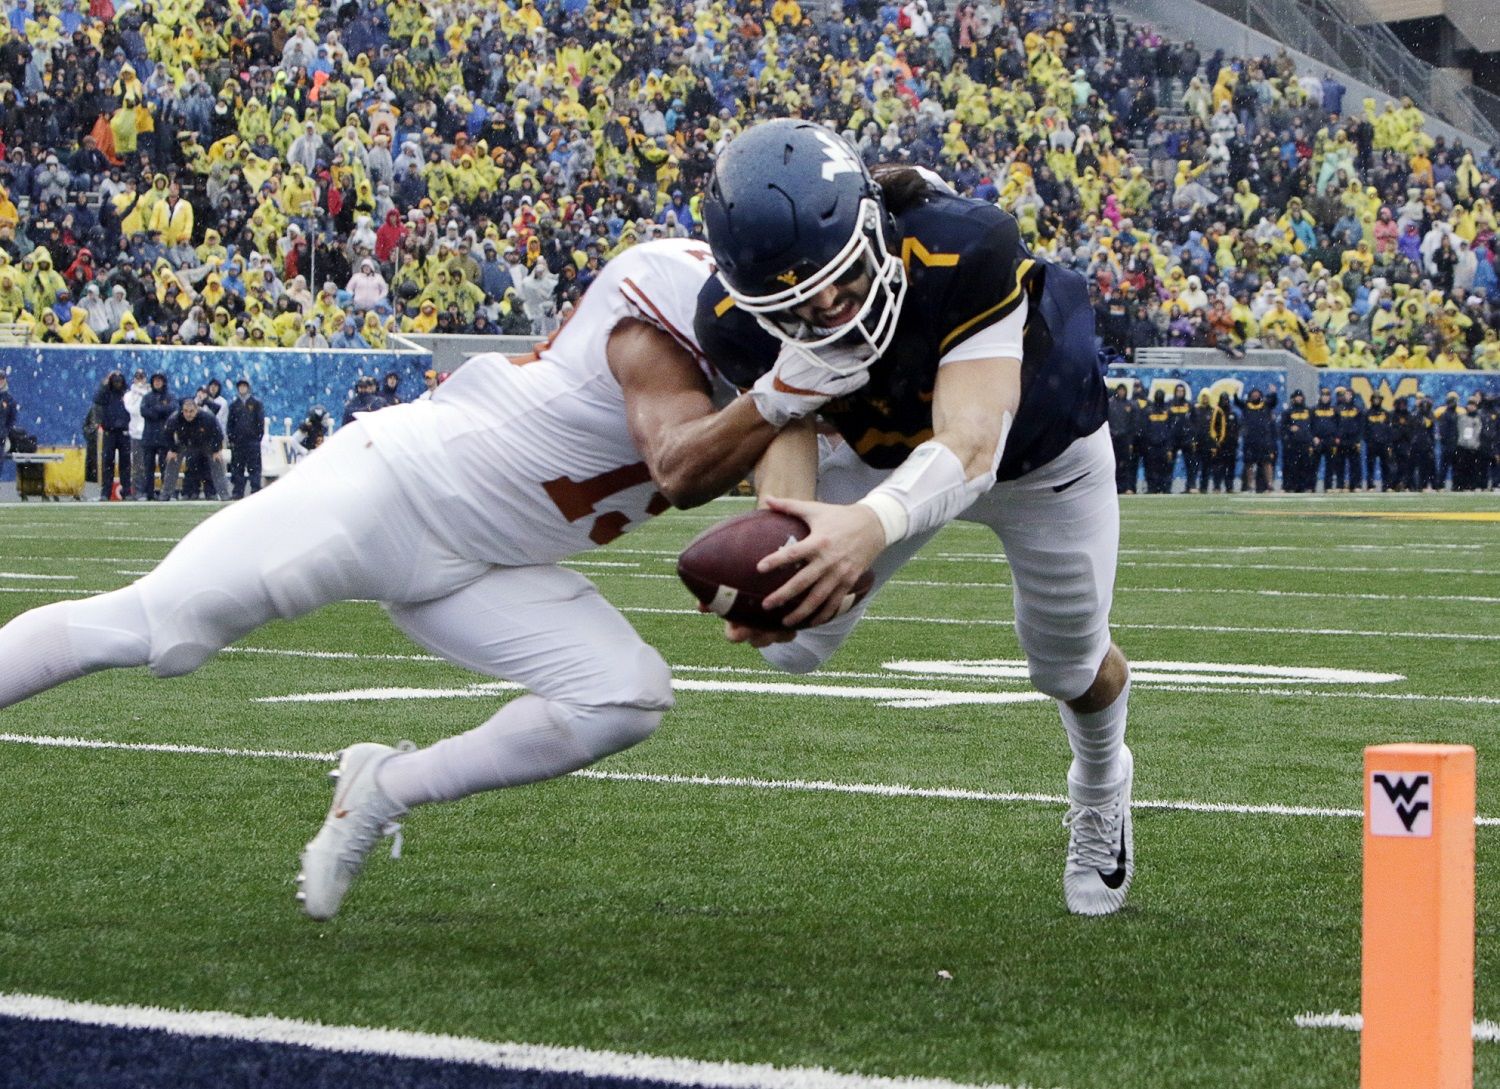 Texas defensive back Brandon Jones (19) tackles West Virginia quarterback Will Grier (7) short of the goal line during the first half of an NCAA college football game, Saturday, Nov. 18, 2017, in Morgantown, W.Va. Grier injured his hand in during the play and left the game. (AP Photo/Raymond Thompson)